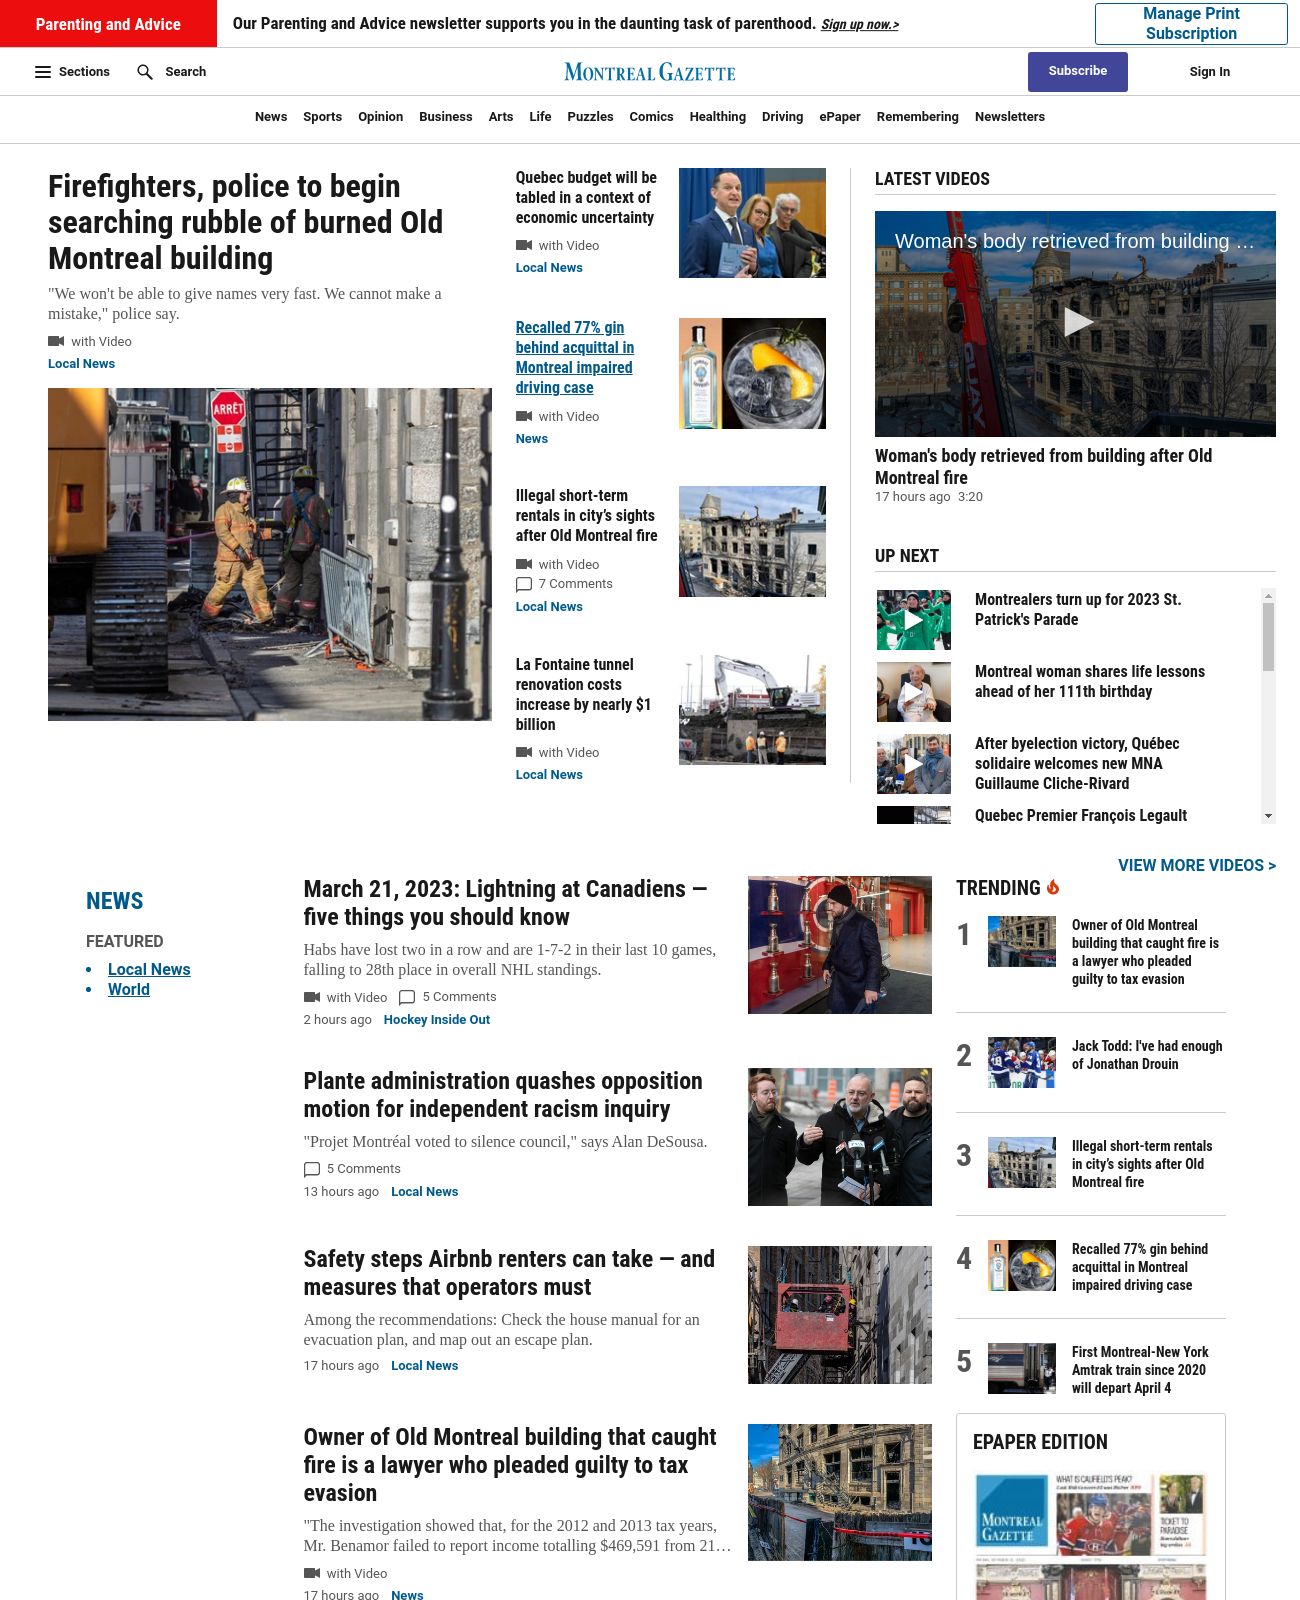 Montreal Gazette at 2023-03-21 09:59:54-04:00 local time